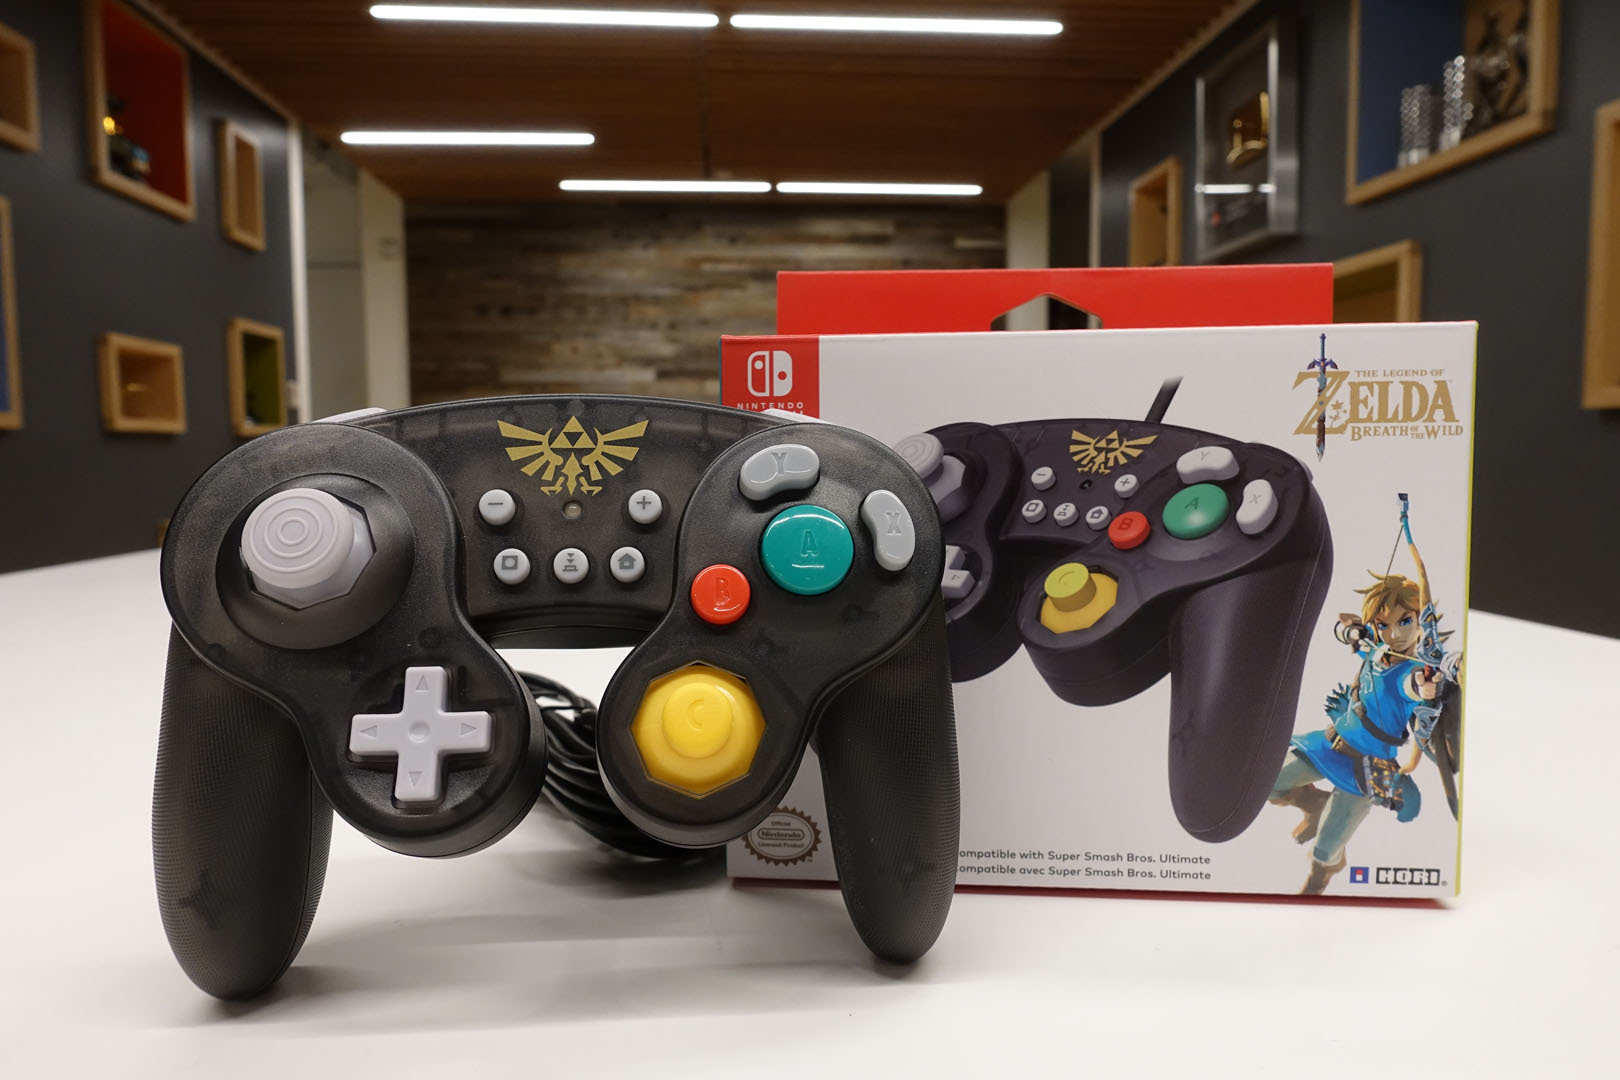 Super Smash Bros. More - Adapters, Accessories: GameSpot GameCube Switch And Controllers, Ultimate Wireless